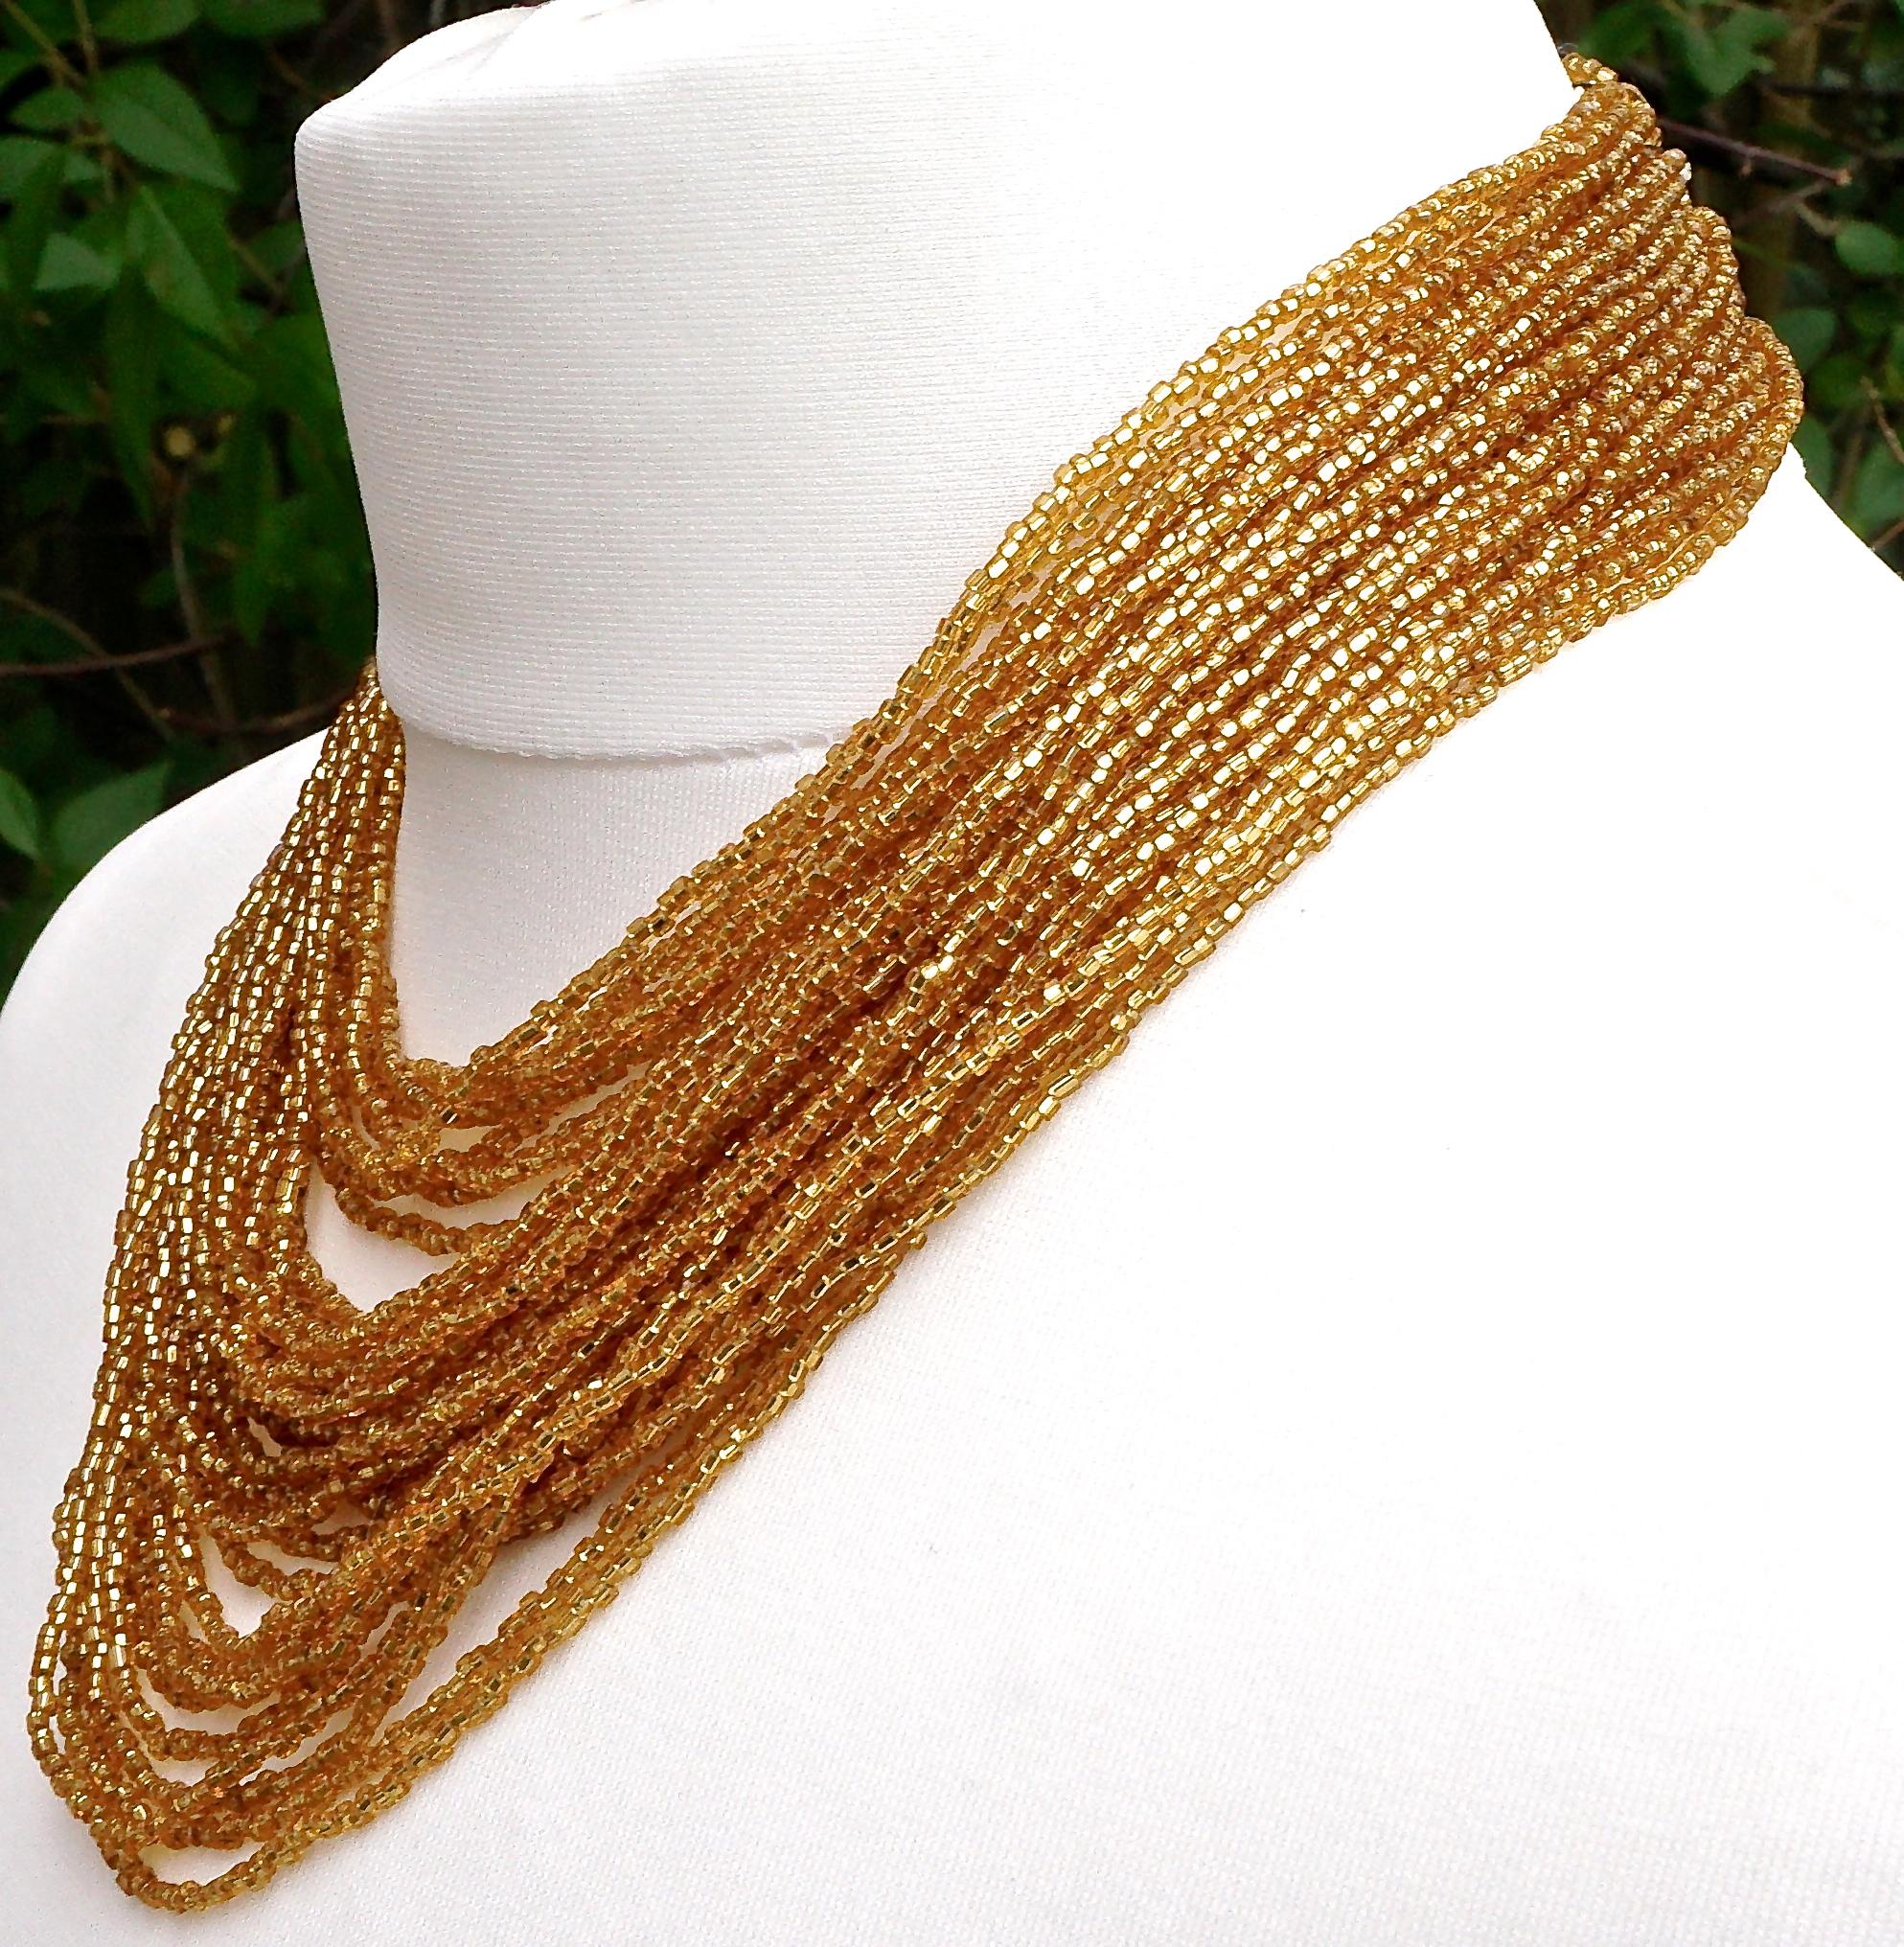 Beautiful multi strand gold glass bead necklace, featuring a large clip clasp with a swirl gold bead design. There are thirty five rows of beads, the shortest length is 41cm / 16.14 inches, and the clasp is 2.9cm / 1.14 inches by 2.2cm / .86cm. The